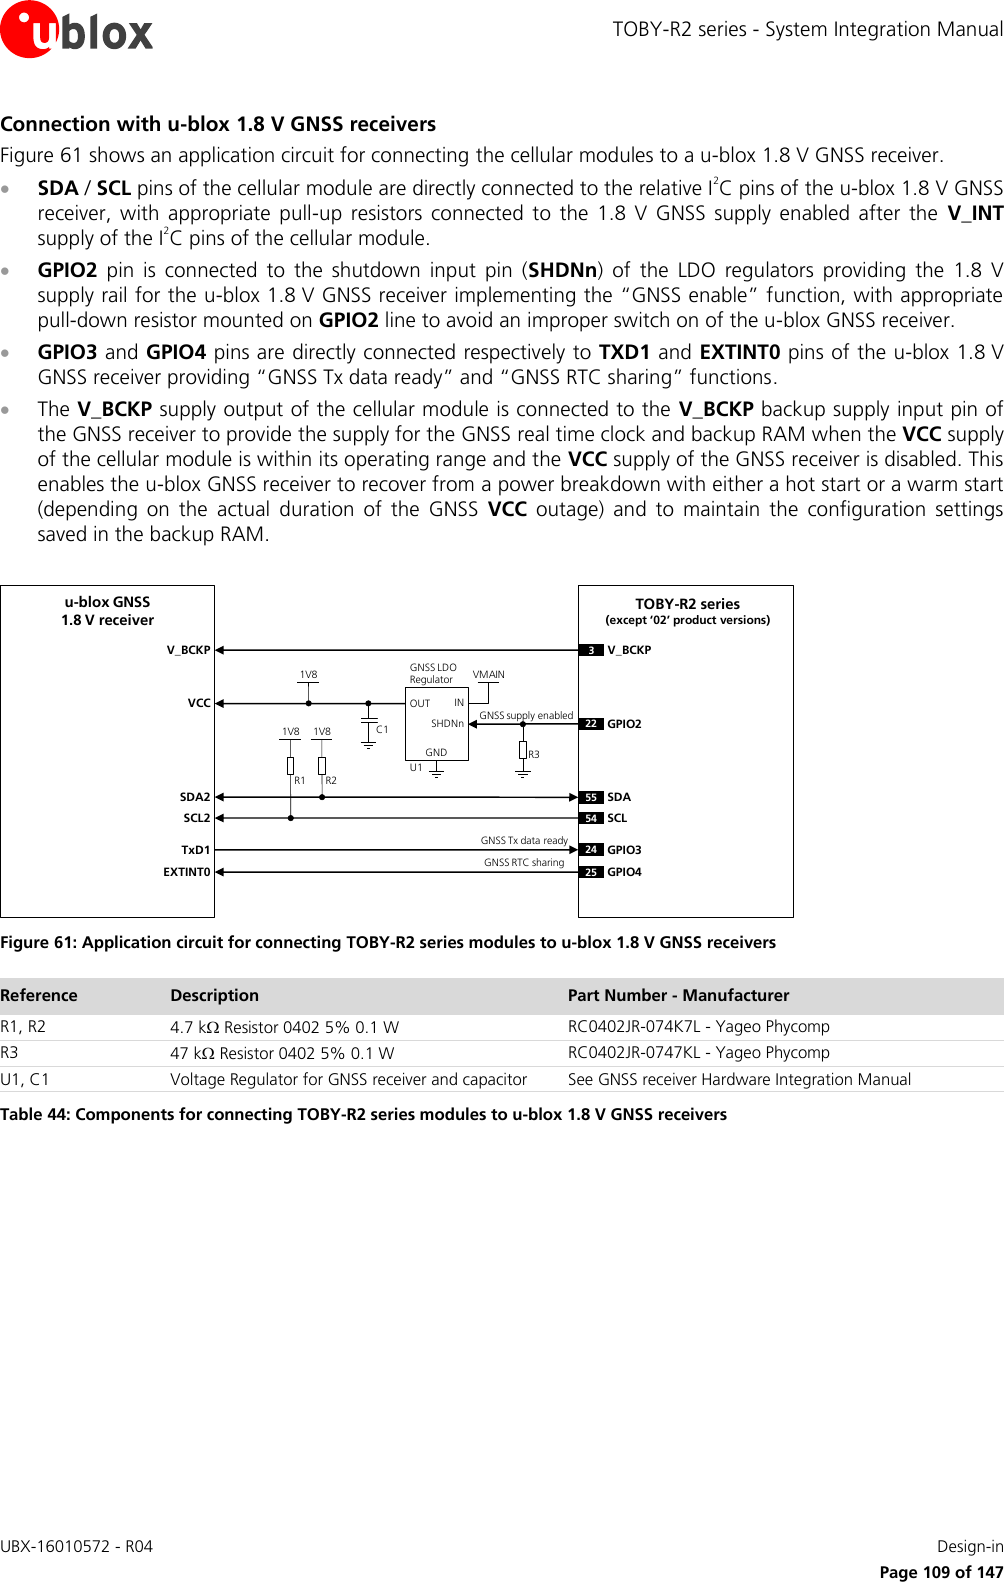 TOBY-R2 series - System Integration Manual UBX-16010572 - R04    Design-in     Page 109 of 147 Connection with u-blox 1.8 V GNSS receivers Figure 61 shows an application circuit for connecting the cellular modules to a u-blox 1.8 V GNSS receiver.  SDA / SCL pins of the cellular module are directly connected to the relative I2C pins of the u-blox 1.8 V GNSS receiver,  with  appropriate  pull-up  resistors  connected  to  the  1.8  V  GNSS  supply  enabled  after  the  V_INT supply of the I2C pins of the cellular module.  GPIO2  pin  is  connected  to  the  shutdown  input  pin  (SHDNn)  of  the  LDO  regulators  providing  the  1.8  V supply rail for the u-blox 1.8 V GNSS receiver implementing the “GNSS enable” function, with appropriate pull-down resistor mounted on GPIO2 line to avoid an improper switch on of the u-blox GNSS receiver.  GPIO3 and GPIO4 pins are directly connected respectively to TXD1 and EXTINT0 pins of the u-blox 1.8 V GNSS receiver providing “GNSS Tx data ready” and “GNSS RTC sharing” functions.  The V_BCKP supply output of the cellular module is connected to the  V_BCKP backup supply input pin of the GNSS receiver to provide the supply for the GNSS real time clock and backup RAM when the VCC supply of the cellular module is within its operating range and the VCC supply of the GNSS receiver is disabled. This enables the u-blox GNSS receiver to recover from a power breakdown with either a hot start or a warm start (depending  on  the  actual  duration  of  the  GNSS  VCC  outage)  and  to  maintain  the  configuration  settings saved in the backup RAM.  R1INOUTGNDGNSS LDORegulatorSHDNnu-blox GNSS1.8 V receiverSDA2SCL2R21V8 1V8VMAIN1V8U122 GPIO2SDASCLC1TxD1 GPIO3555424VCCR3V_BCKP V_BCKP3GNSS Tx data readyGNSS supply enabledTOBY-R2 series(except ‘02’ product versions)EXTINT0 GPIO425GNSS RTC sharing Figure 61: Application circuit for connecting TOBY-R2 series modules to u-blox 1.8 V GNSS receivers Reference Description Part Number - Manufacturer R1, R2 4.7 k Resistor 0402 5% 0.1 W  RC0402JR-074K7L - Yageo Phycomp R3 47 k Resistor 0402 5% 0.1 W  RC0402JR-0747KL - Yageo Phycomp U1, C1 Voltage Regulator for GNSS receiver and capacitor See GNSS receiver Hardware Integration Manual Table 44: Components for connecting TOBY-R2 series modules to u-blox 1.8 V GNSS receivers  